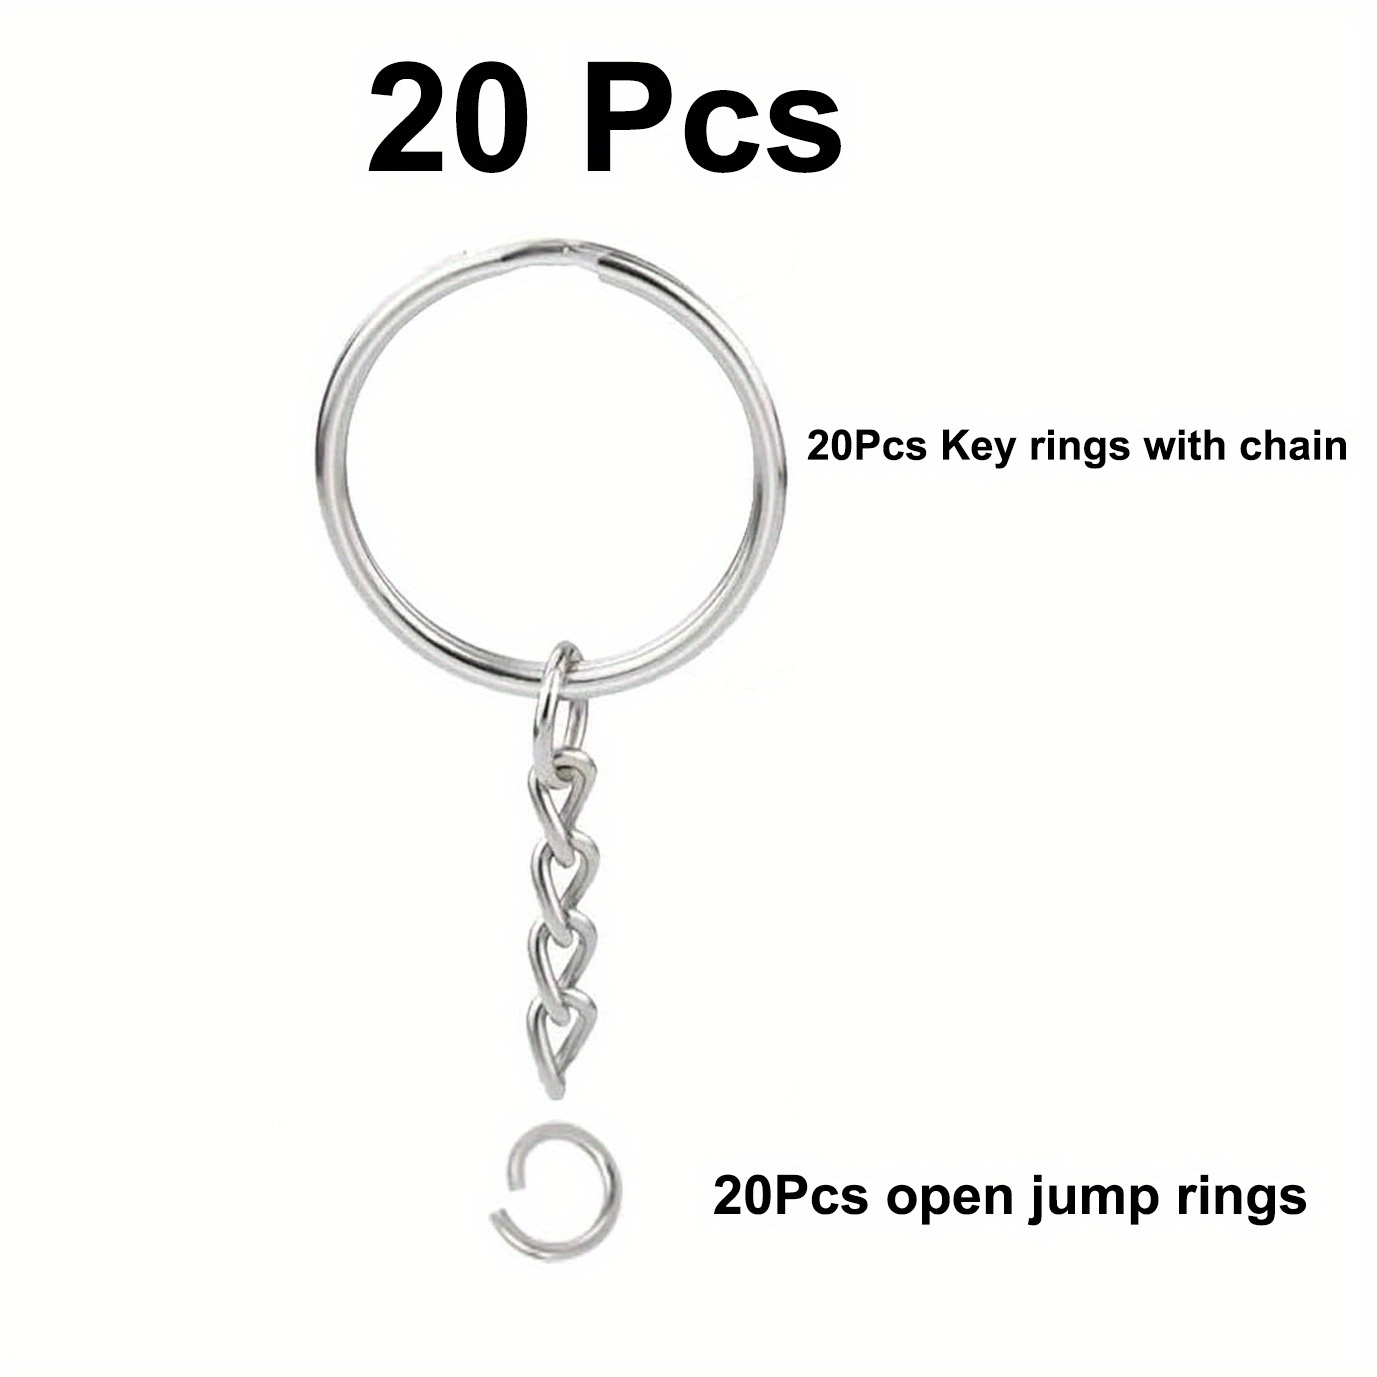 200PCS Key Rings Split Bulk Keyrings for Keychain and Crafts (25mm) silver